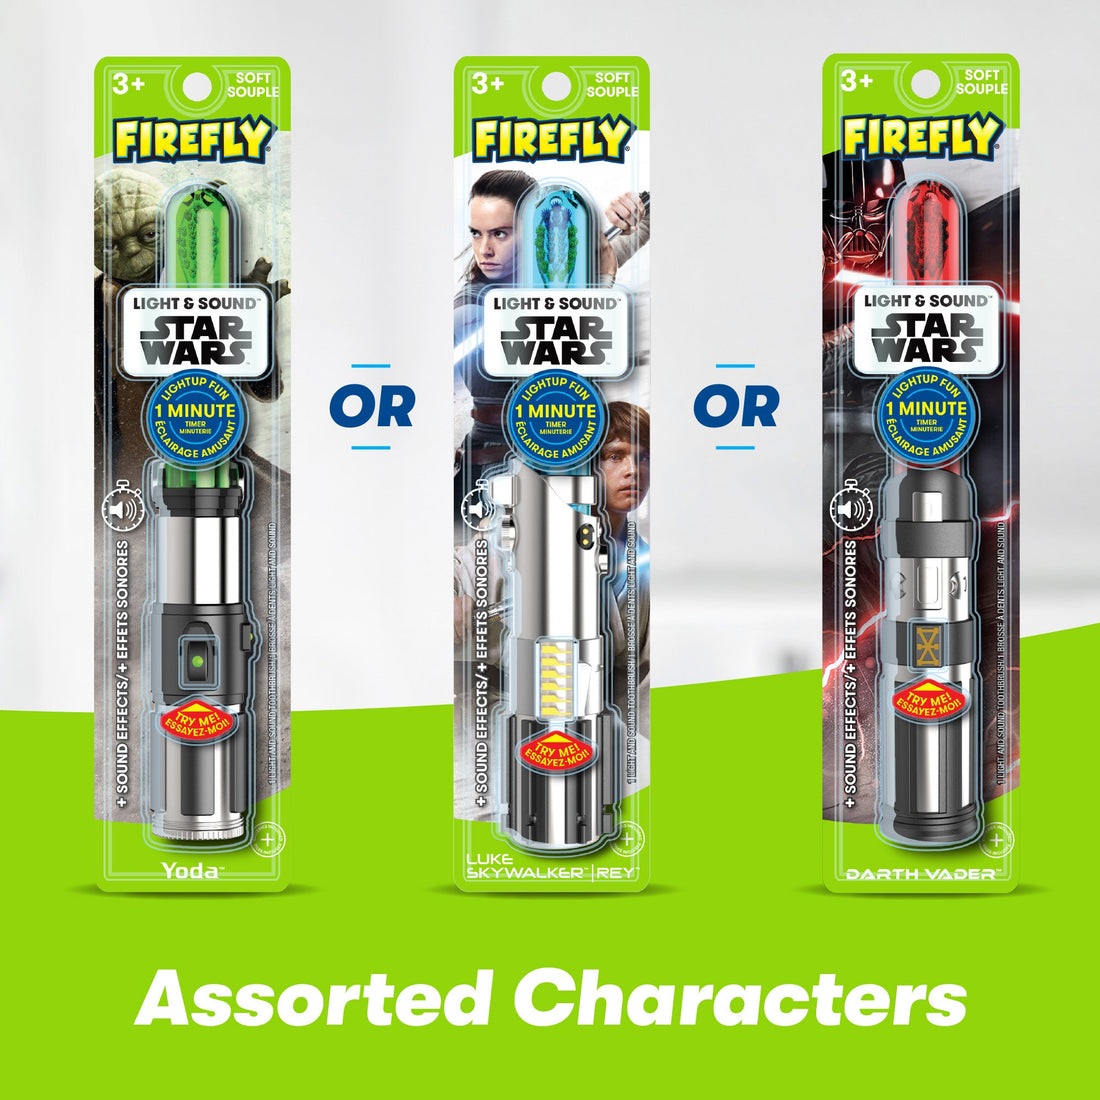 3 Firefly Star Wars Lightsaber Toothbrushes Yoda, Rey and Luke, Darth Vader, Assorted characters